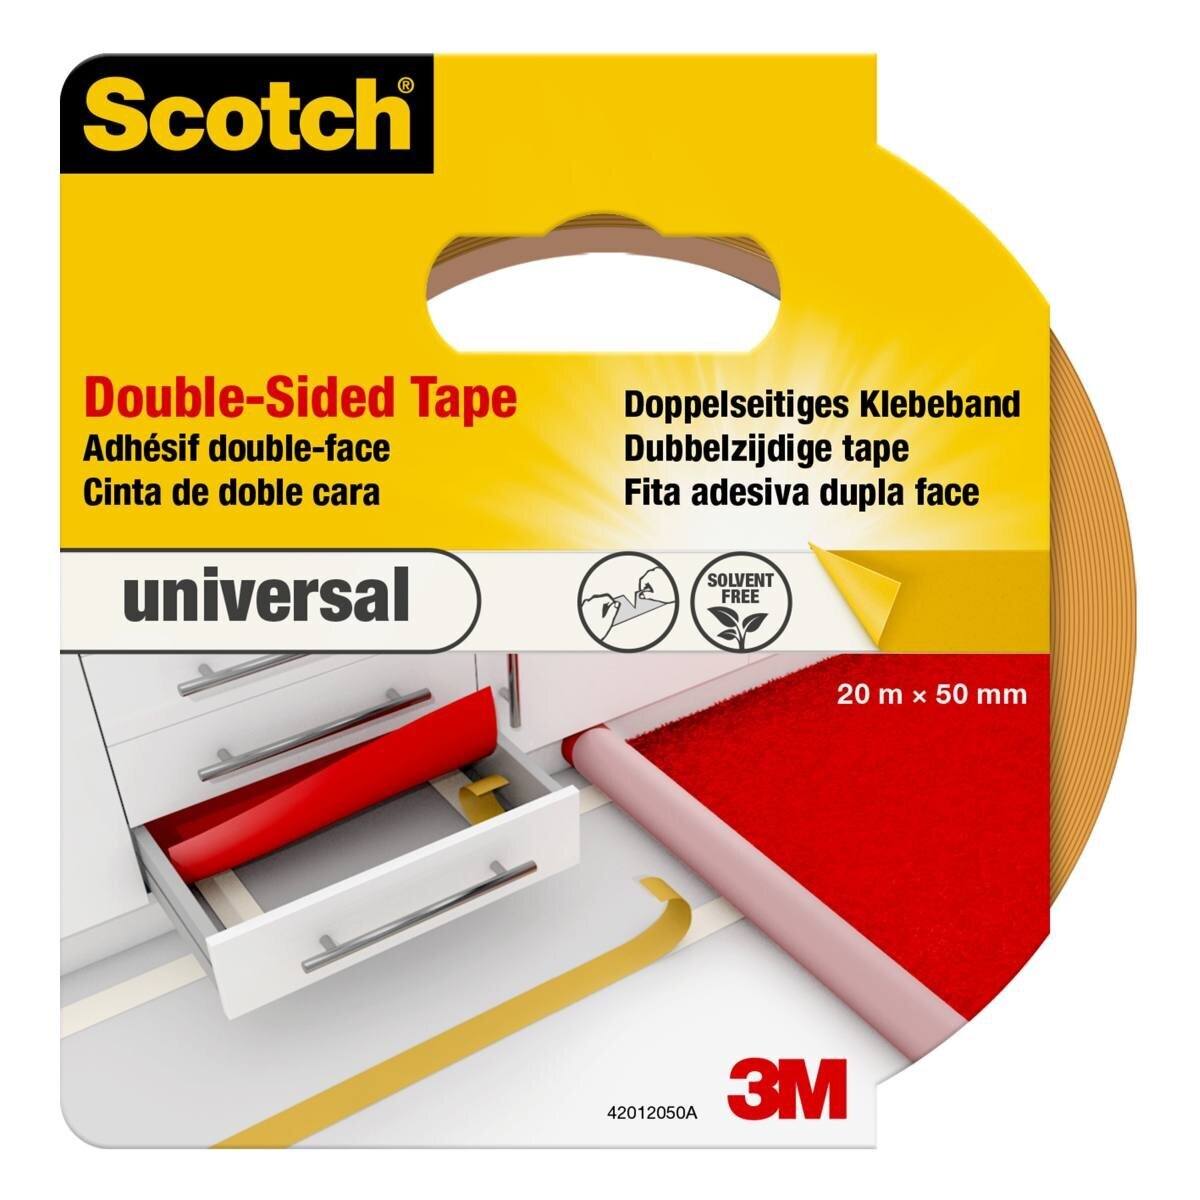 3M Scotch double-sided adhesive tape 42012050, 50 mm x 20 m, light brown